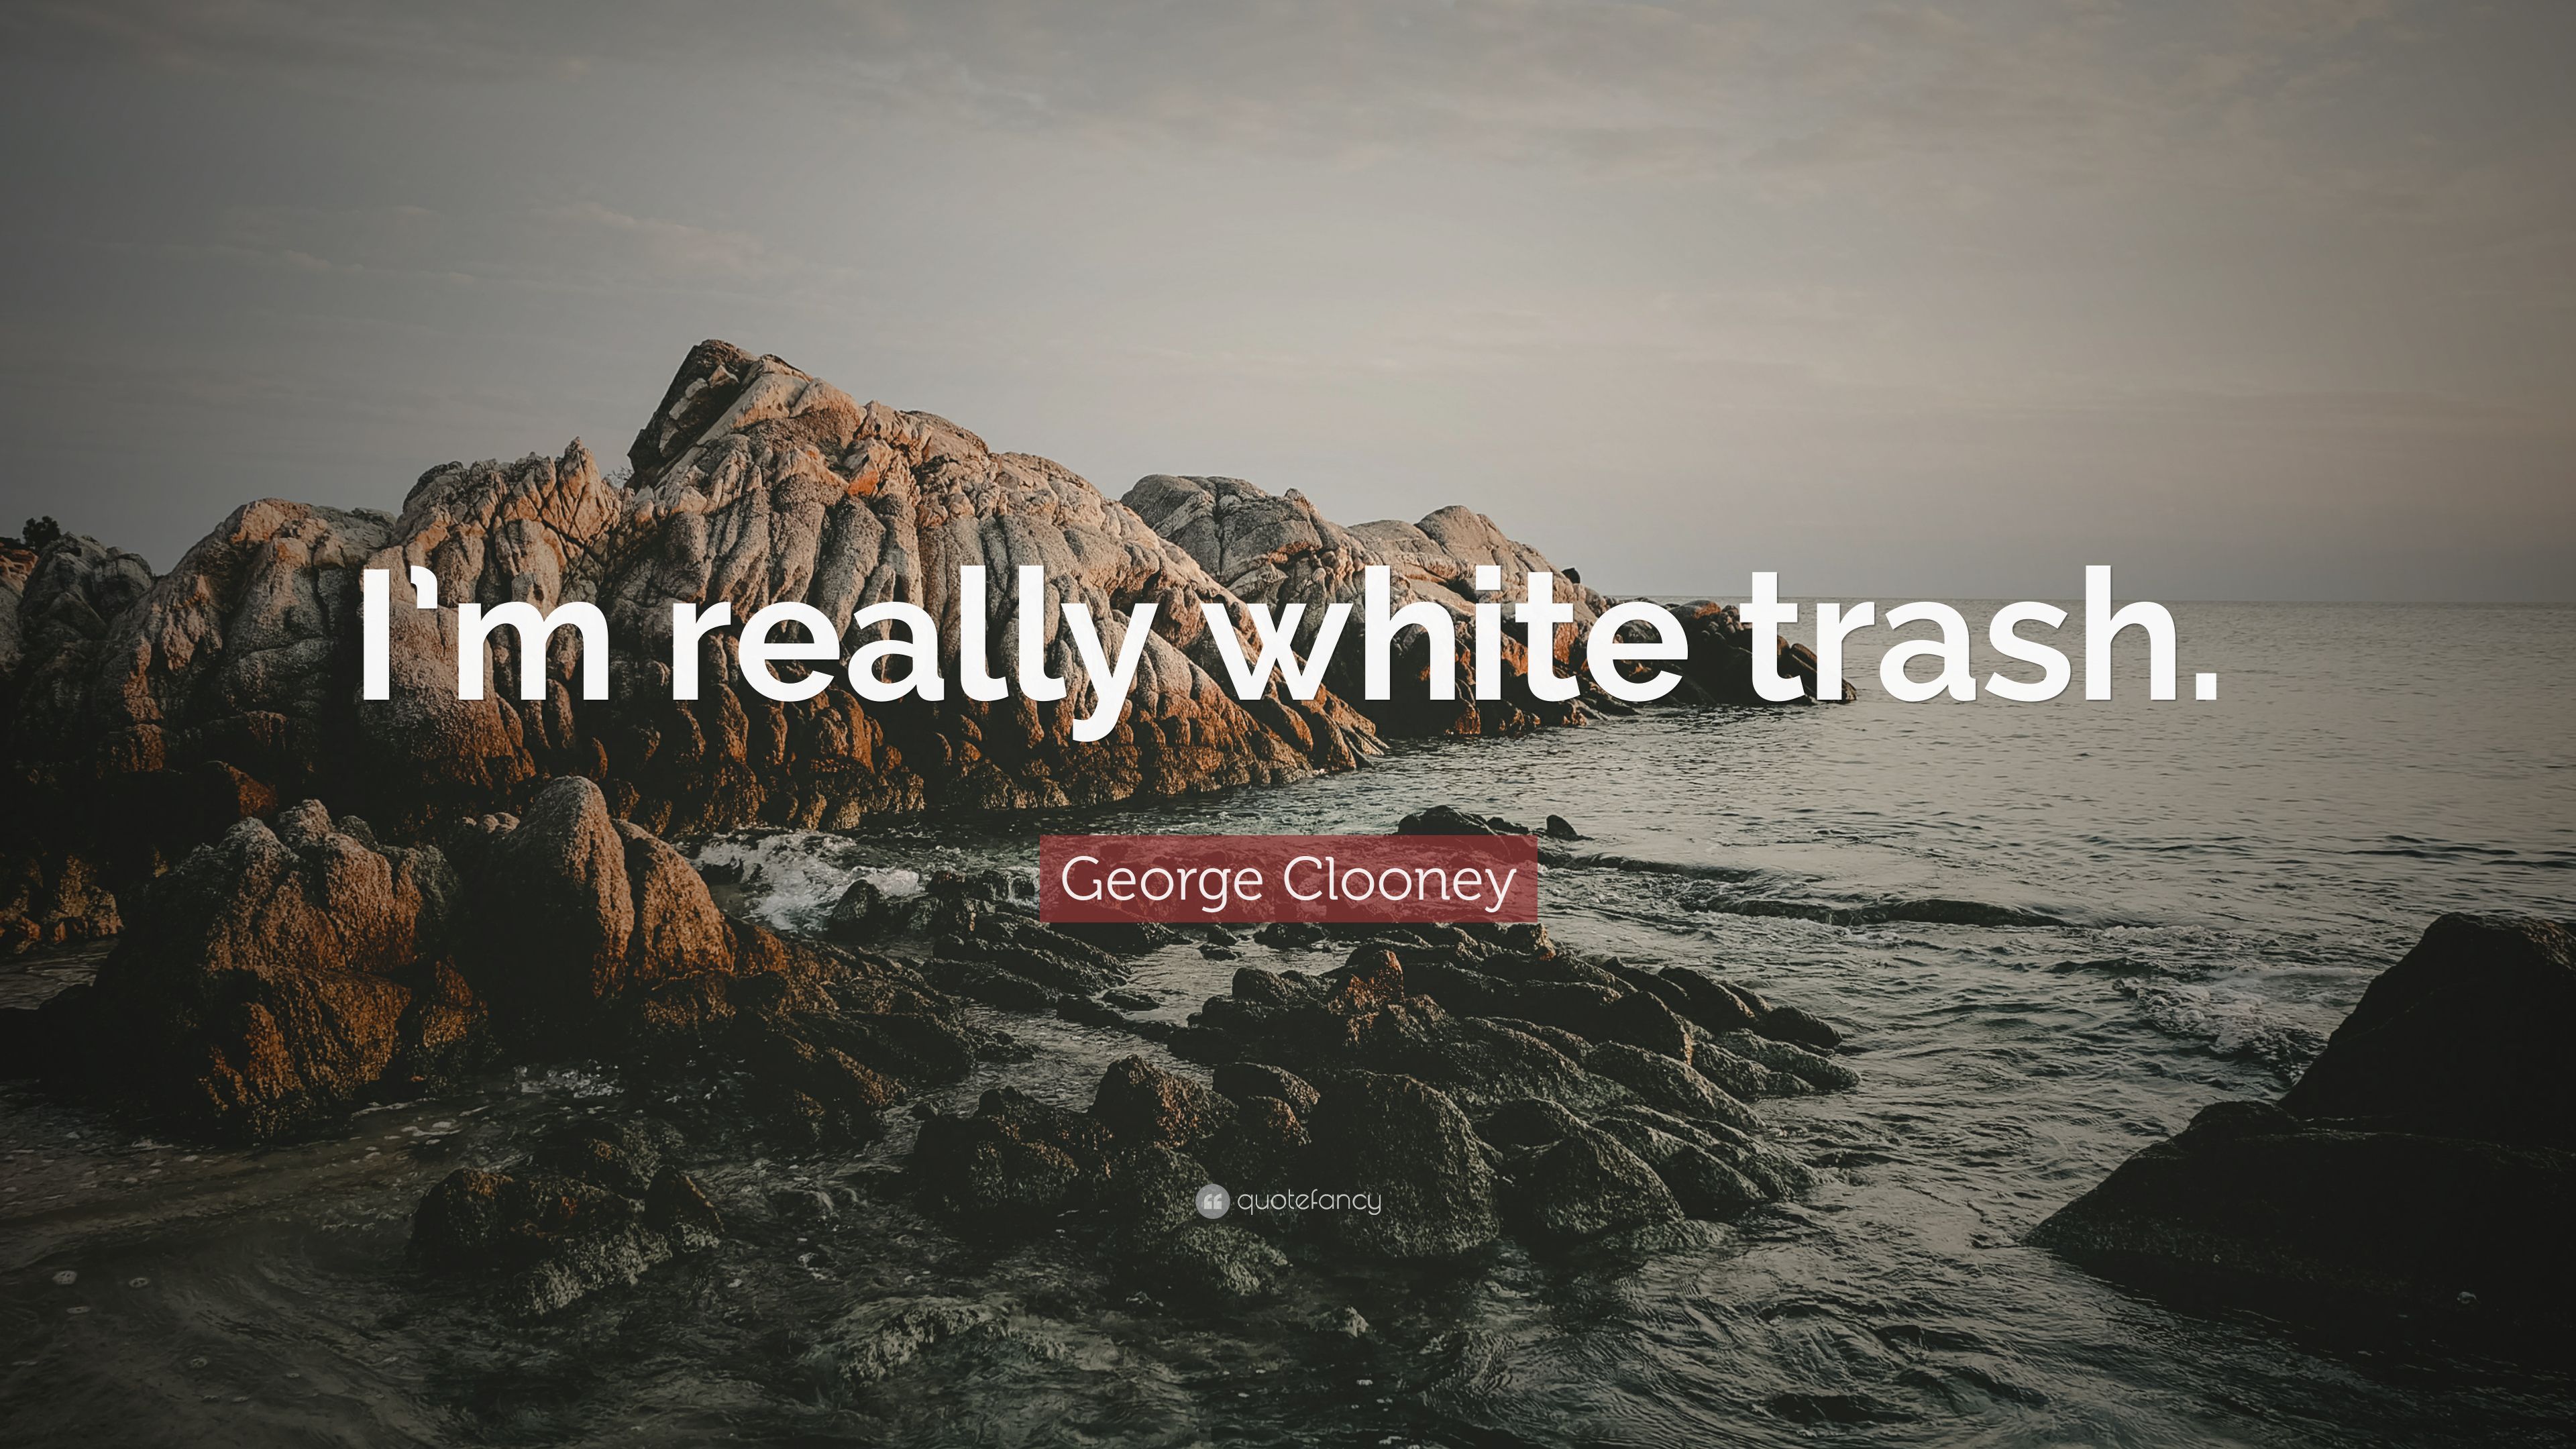 George Clooney Quote: “I'm really white trash.” (7 wallpaper)